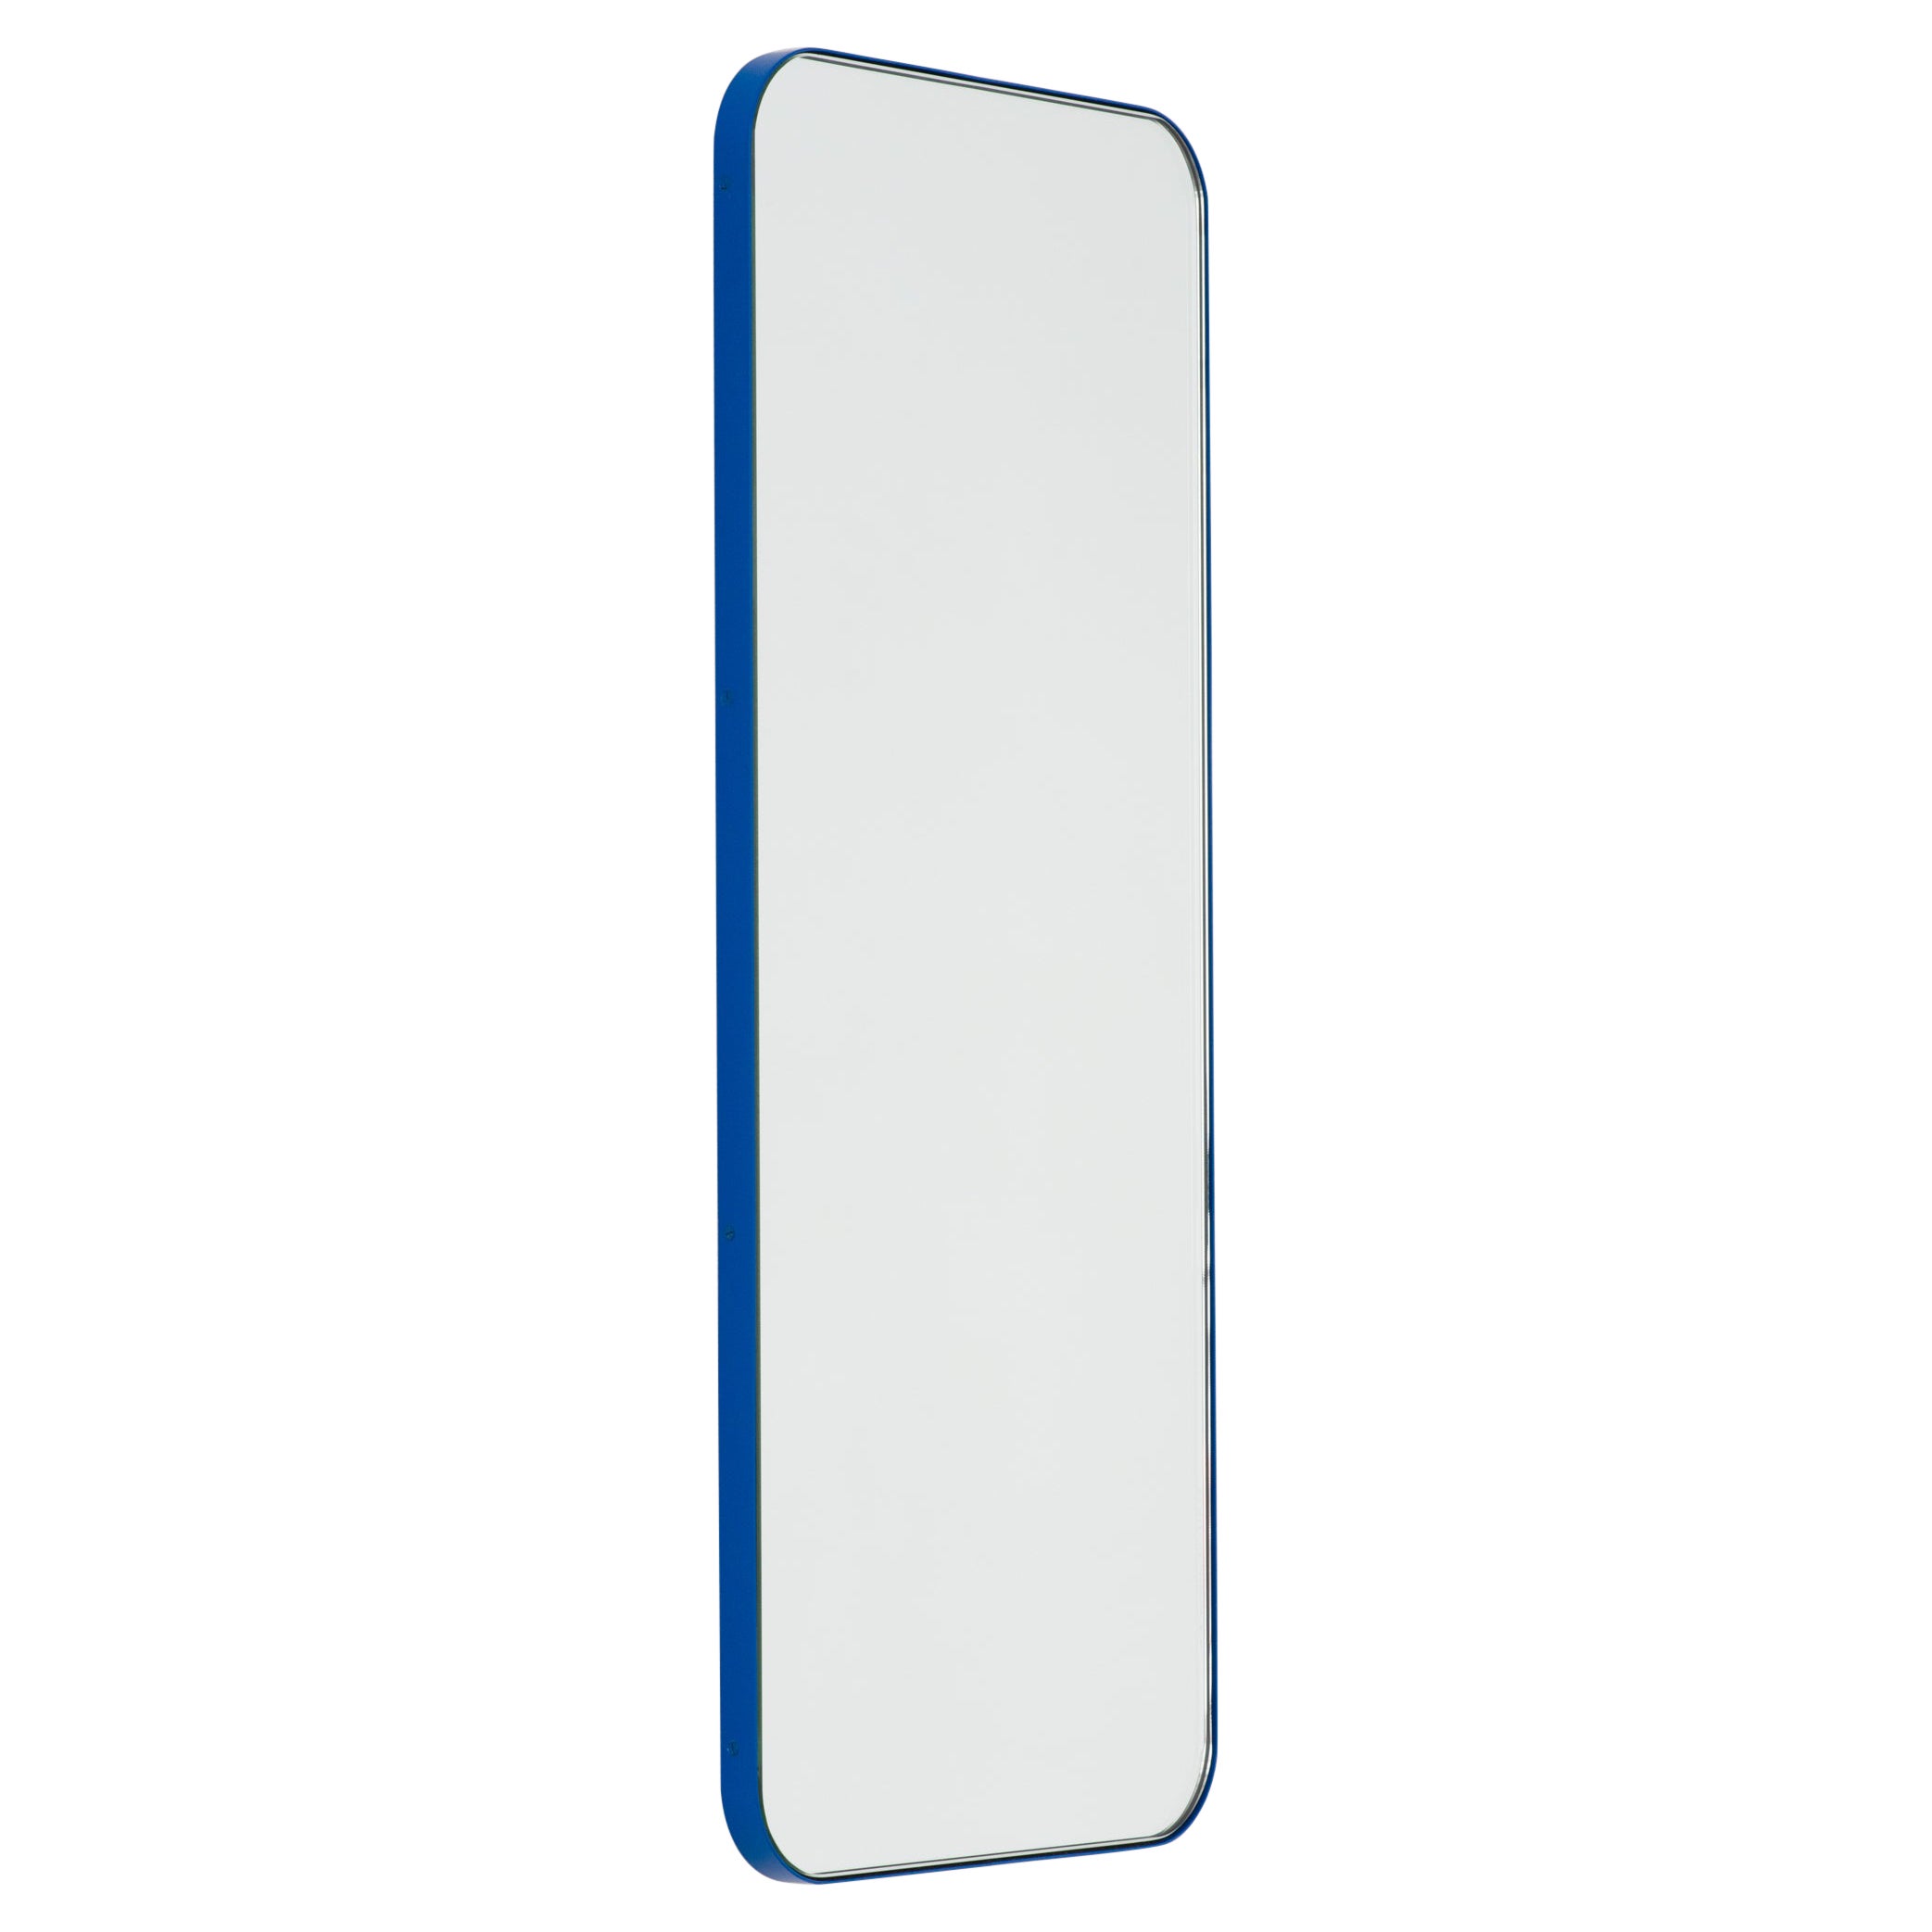 Quadris Rectangular Modern Mirror with a Blue Frame, Small For Sale